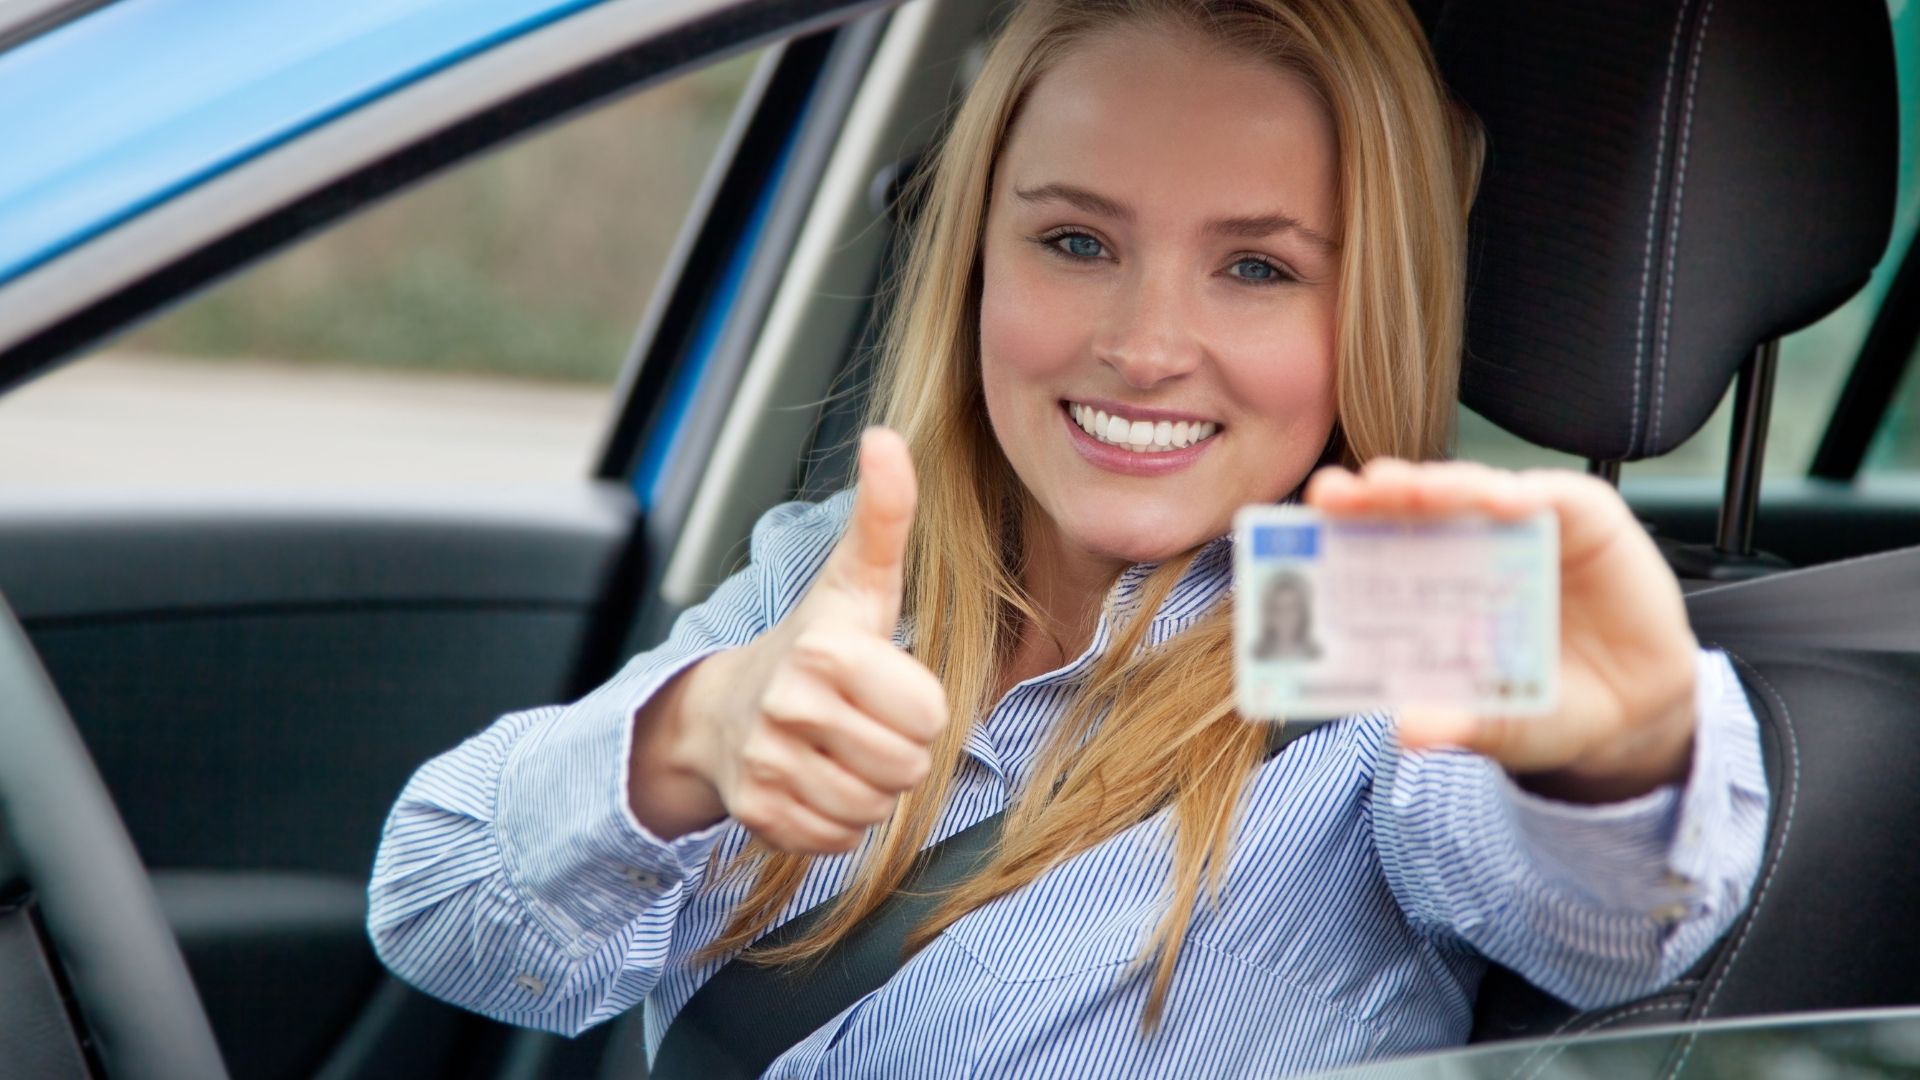 How long does it take for your driver license to come in the mail in california, ny, ct, nv, texas, michigan, illinois